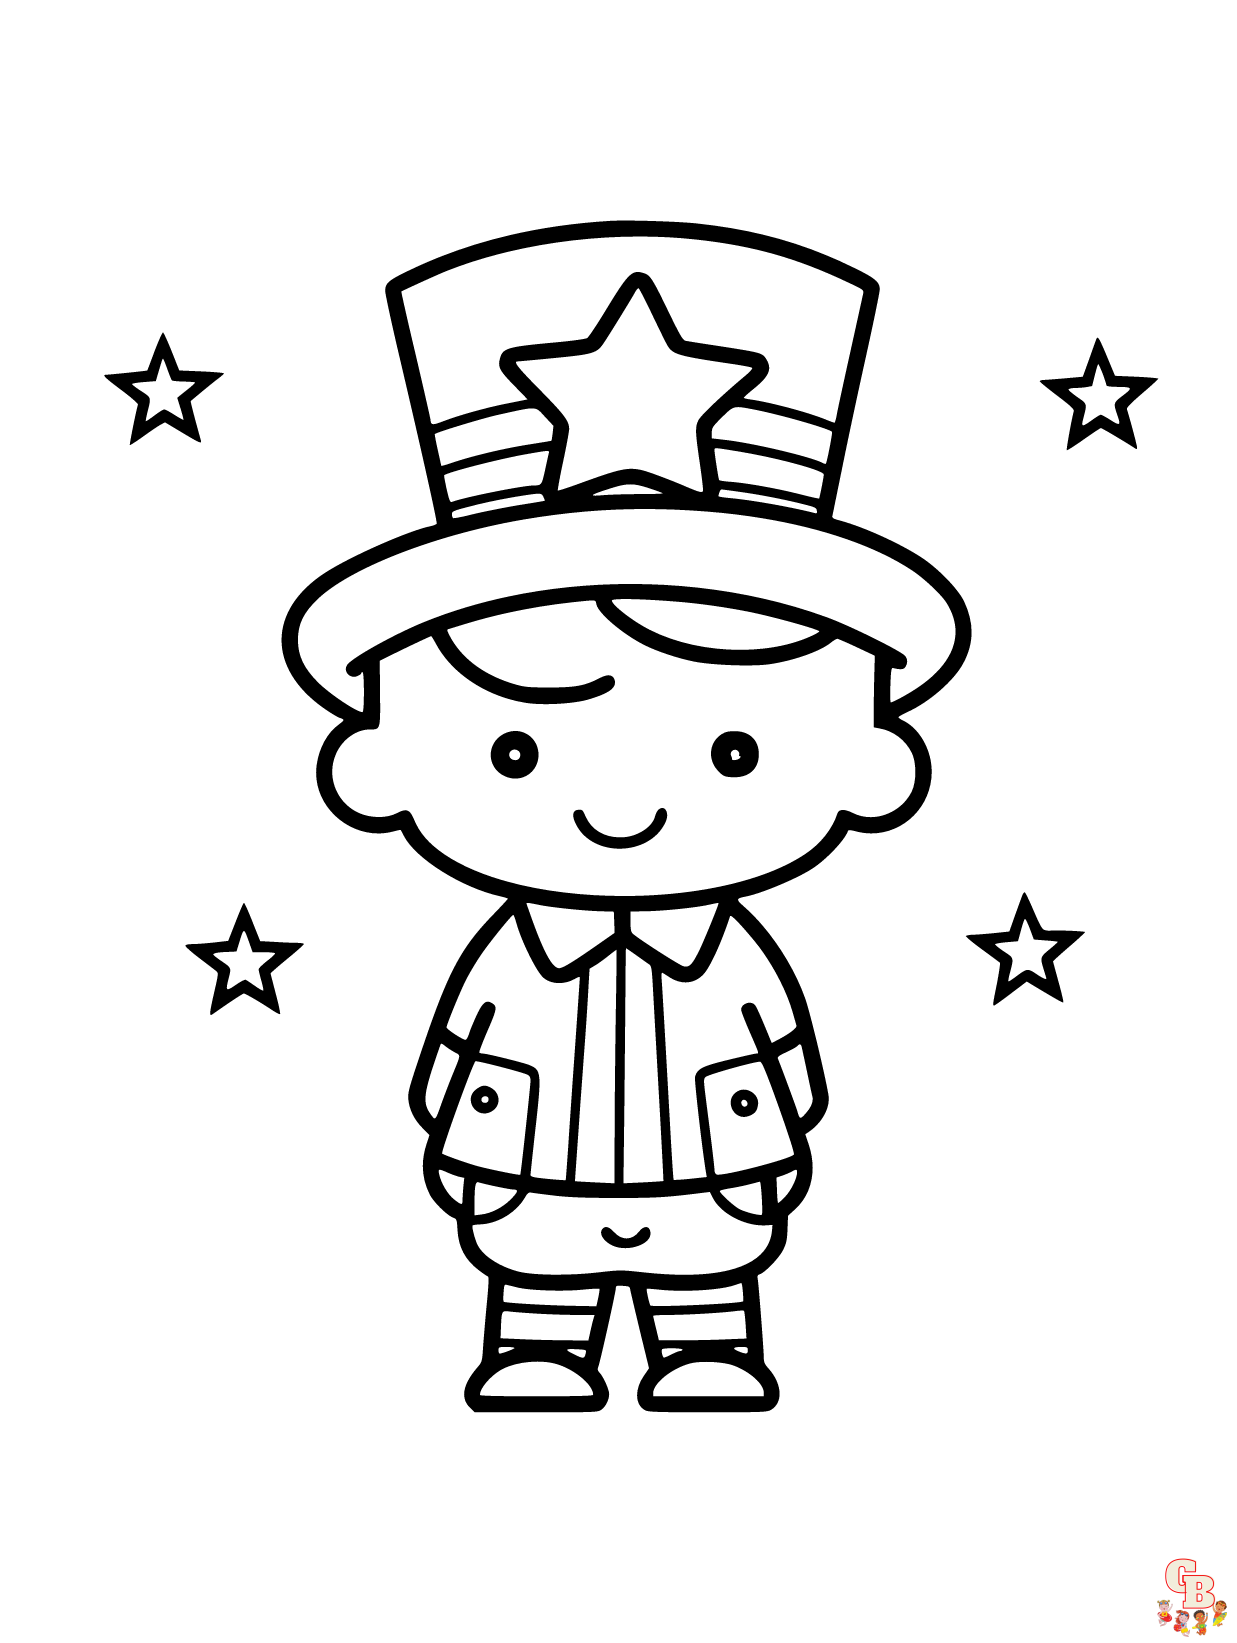 Celebrate independence day with fourth of july coloring pages